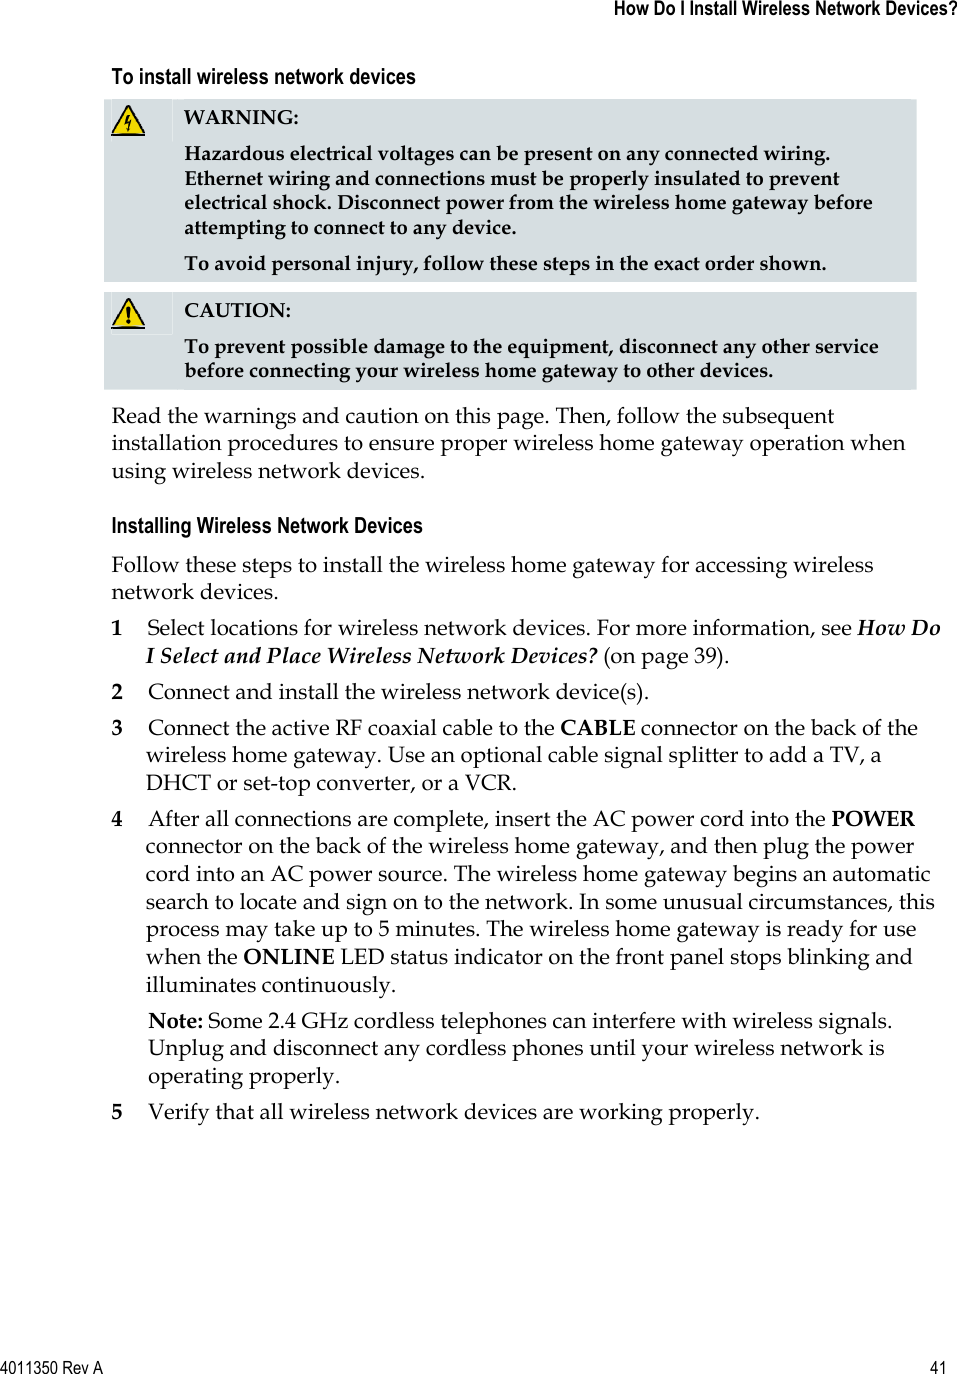 4011350 Rev A    41   How Do I Install Wireless Network Devices?To install wireless network devices WARNING:Hazardous electrical voltages can be present on any connected wiring. Ethernet wiring and connections must be properly insulated to prevent electrical shock. Disconnect power from the wireless home gateway before attempting to connect to any device. To avoid personal injury, follow these steps in the exact order shown.CAUTION:To prevent possible damage to the equipment, disconnect any other service before connecting your wireless home gateway to other devices.Read the warnings and caution on this page. Then, follow the subsequent installation procedures to ensure proper wireless home gateway operation when using wireless network devices. Installing Wireless Network Devices Follow these steps to install the wireless home gateway for accessing wireless network devices. 1Select locations for wireless network devices. For more information, see How Do I Select and Place Wireless Network Devices? (on page 39).2Connect and install the wireless network device(s). 3Connect the active RF coaxial cable to the CABLE connector on the back of the wireless home gateway. Use an optional cable signal splitter to add a TV, a DHCT or set-top converter, or a VCR. 4After all connections are complete, insert the AC power cord into the POWERconnector on the back of the wireless home gateway, and then plug the power cord into an AC power source. The wireless home gateway begins an automatic search to locate and sign on to the network. In some unusual circumstances, this process may take up to 5 minutes. The wireless home gateway is ready for use when the ONLINE LED status indicator on the front panel stops blinking and illuminates continuously. Note: Some 2.4 GHz cordless telephones can interfere with wireless signals. Unplug and disconnect any cordless phones until your wireless network is operating properly. 5Verify that all wireless network devices are working properly. 